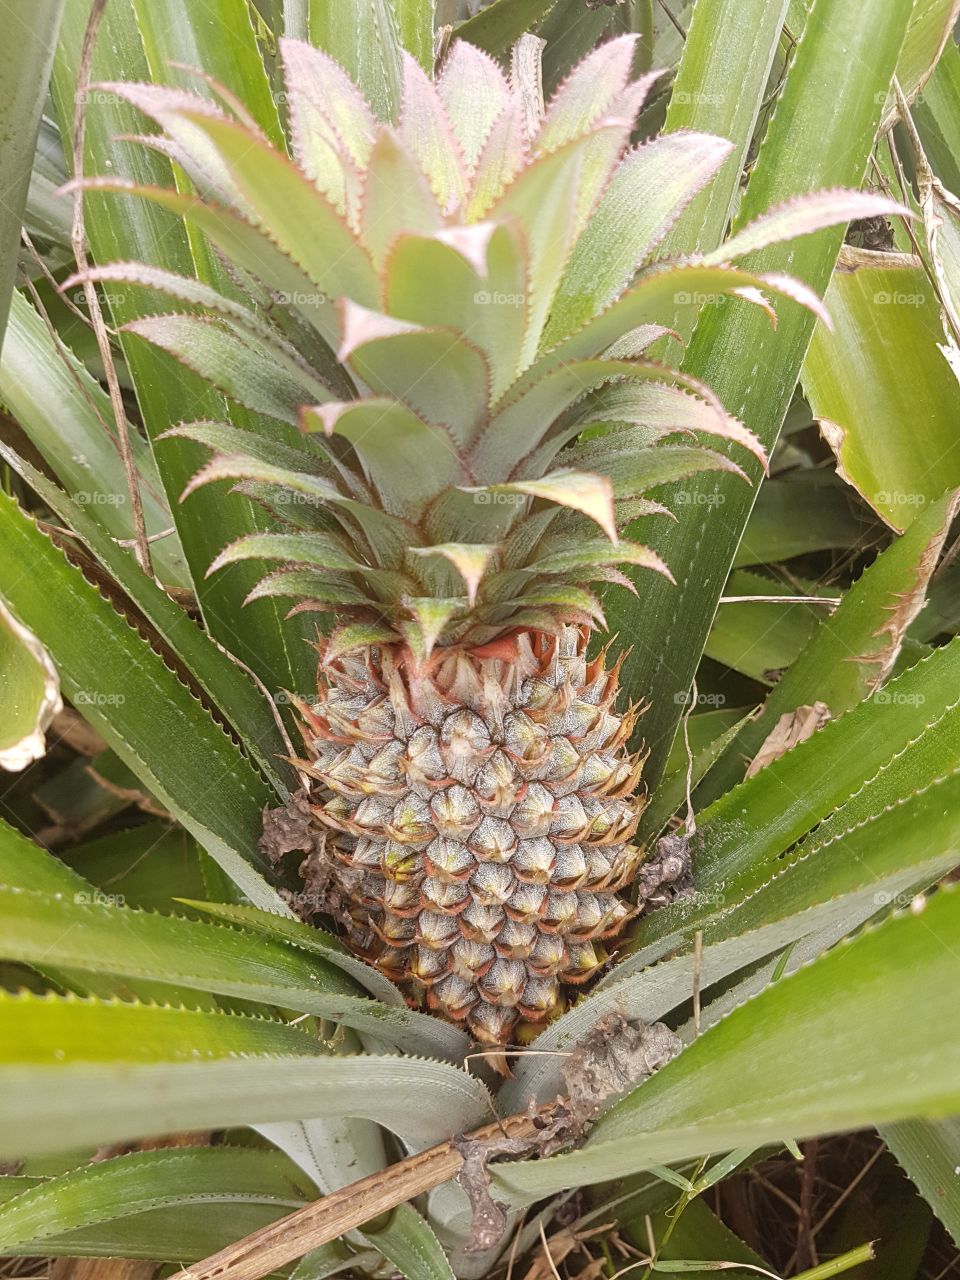 Delicious pineapple from French Polynesia plantations